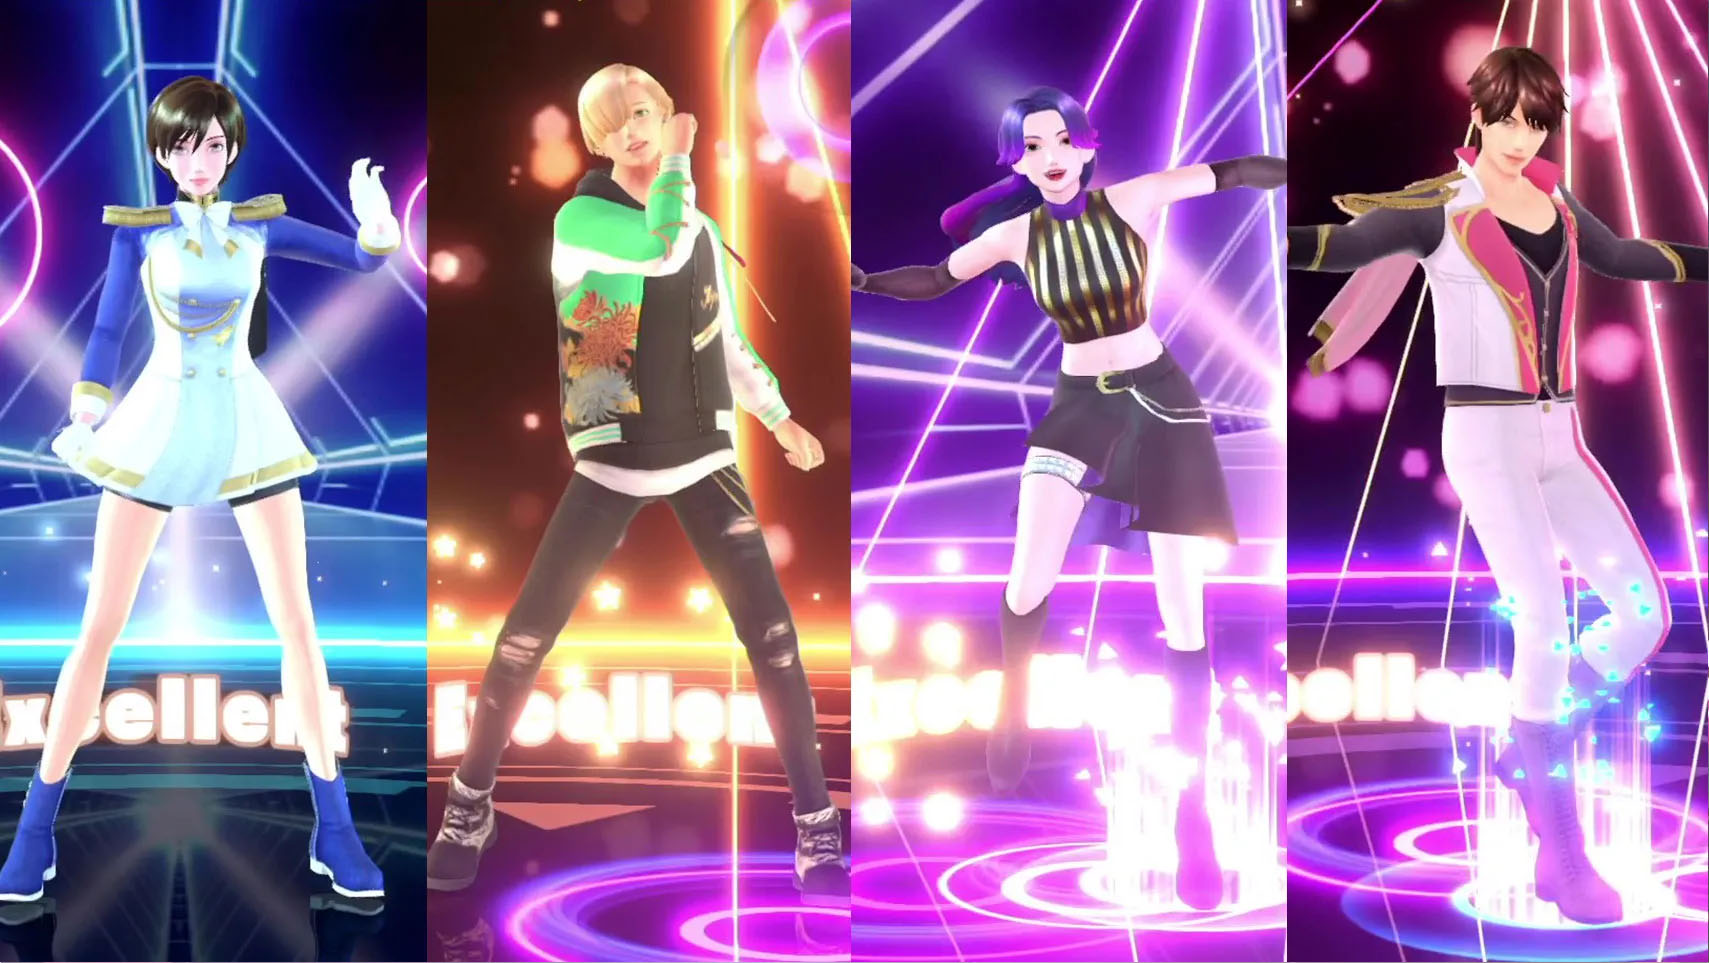 You can also change into luxurious stage costumes!